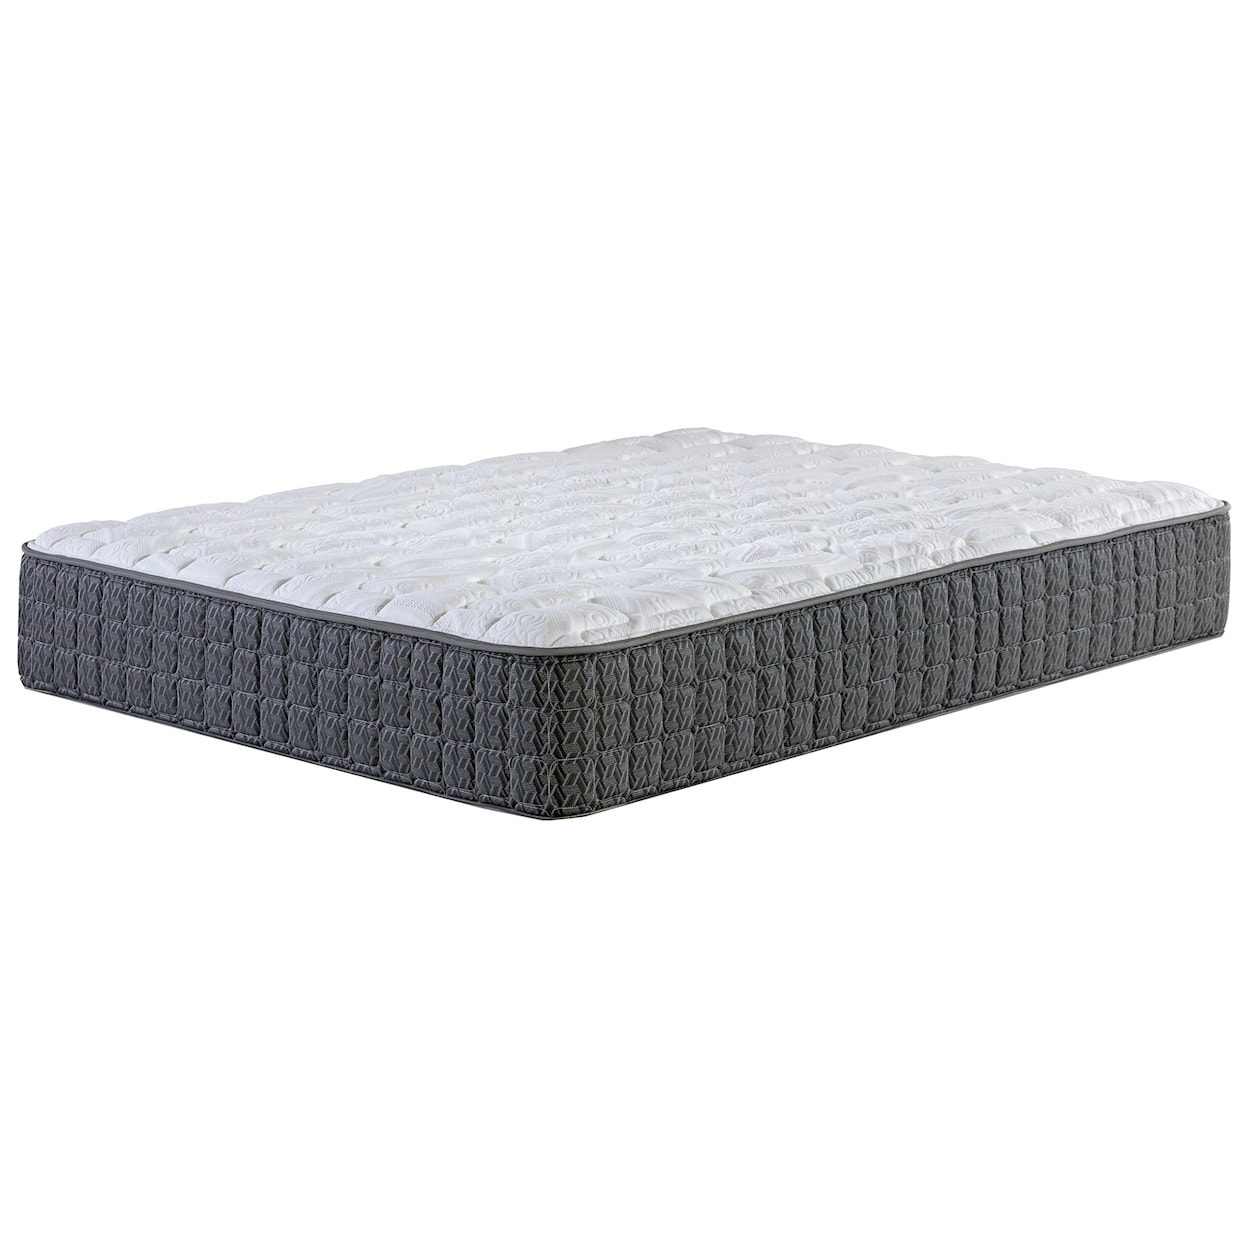 Corsicana Hallandale Firm Queen Firm Two Sided Mattress